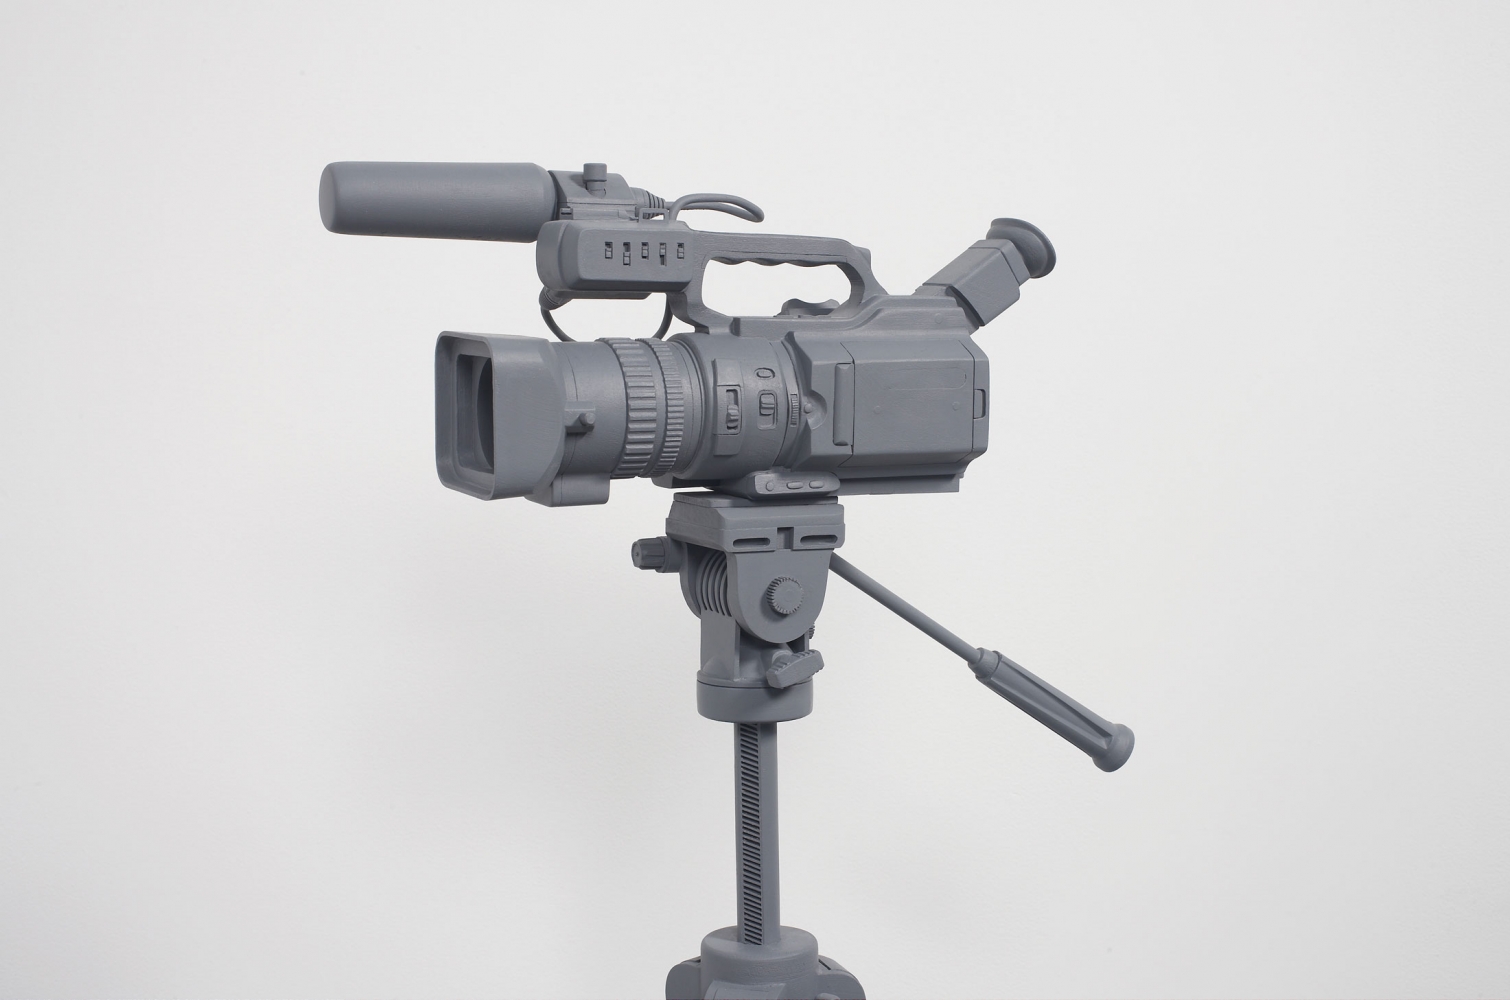 Tom Friedman

Untitled (video camera), 2012
Wood and paint
63 1/2 x 44 1/2 x 44 1/2 inches
(161.29 x 113.03 x 113.03 cm)